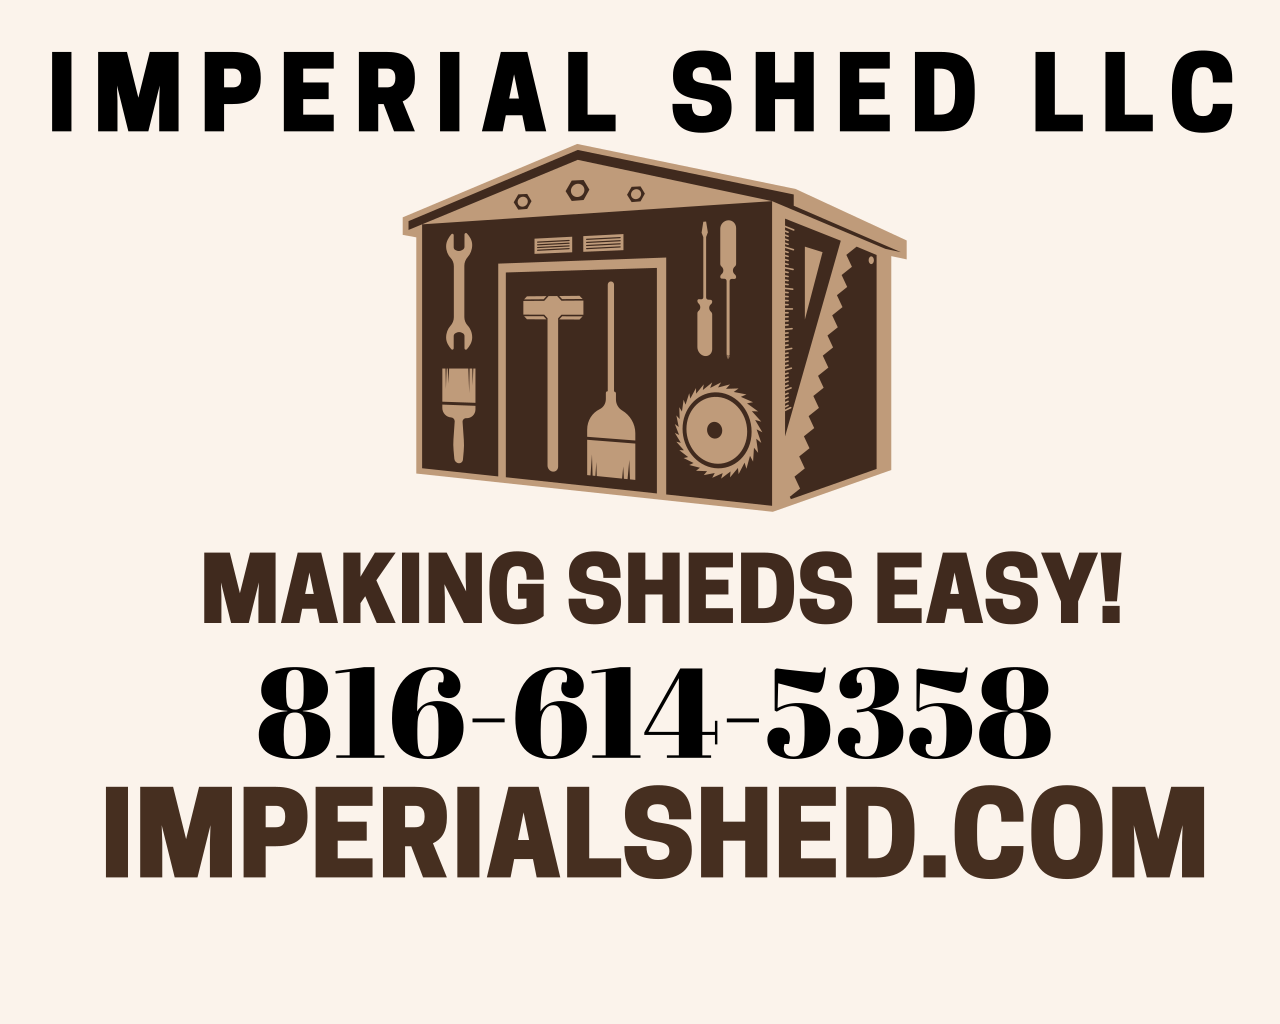 Imperial Shed LLC